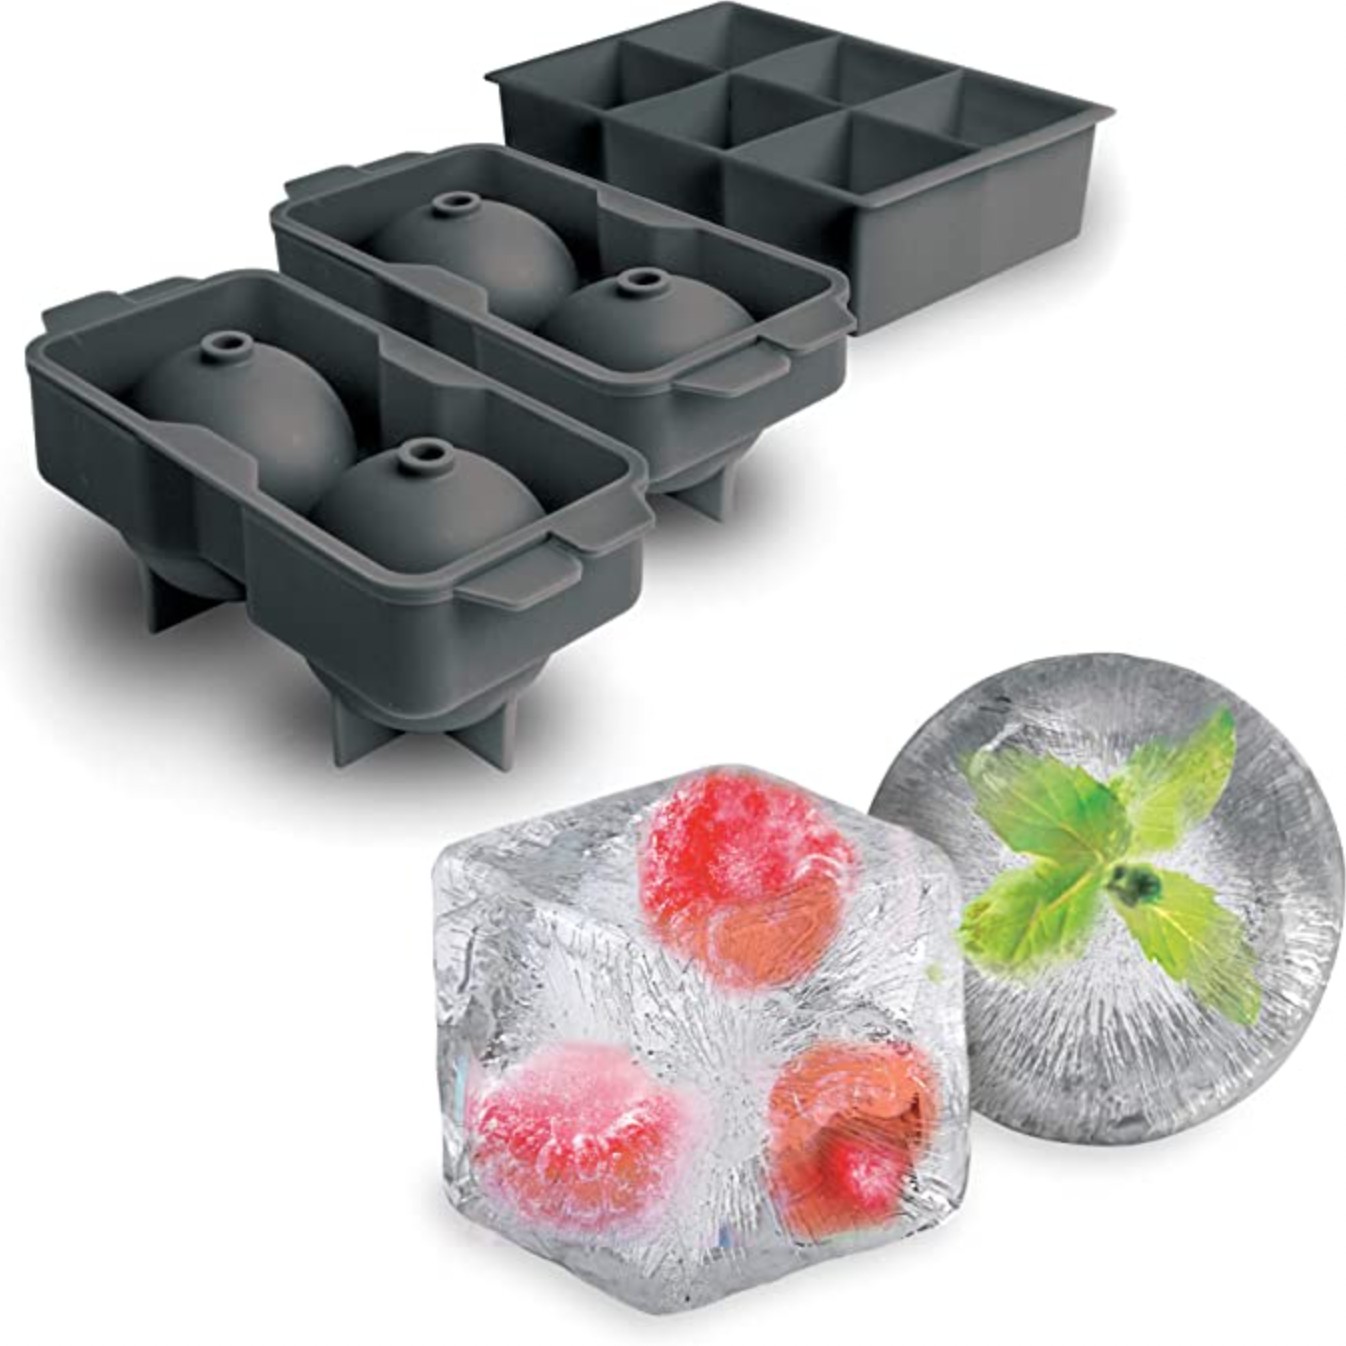 Kitchen Classic Giant Ice Cube Tray